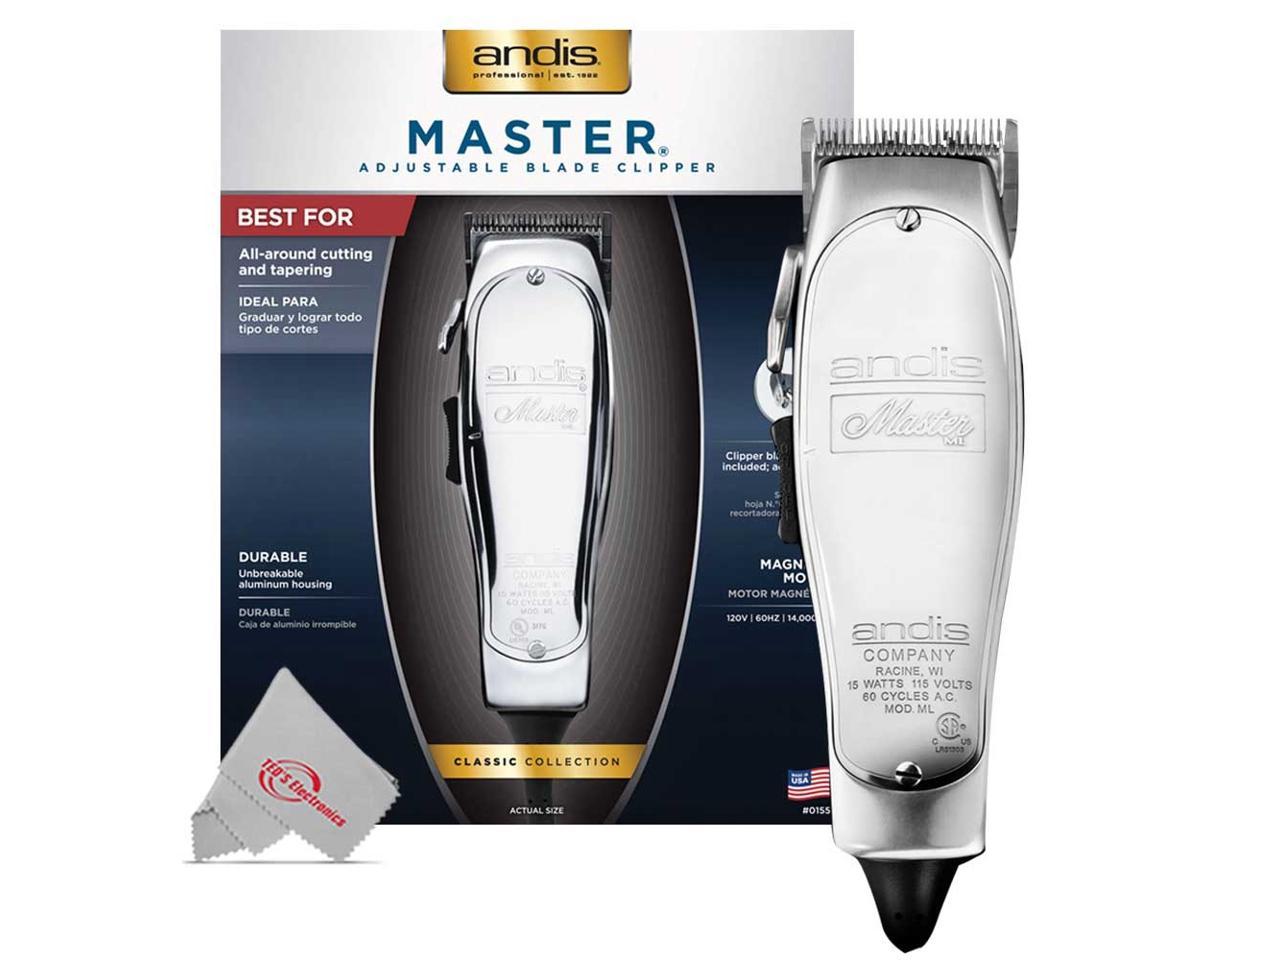 chisel professional hair clipper